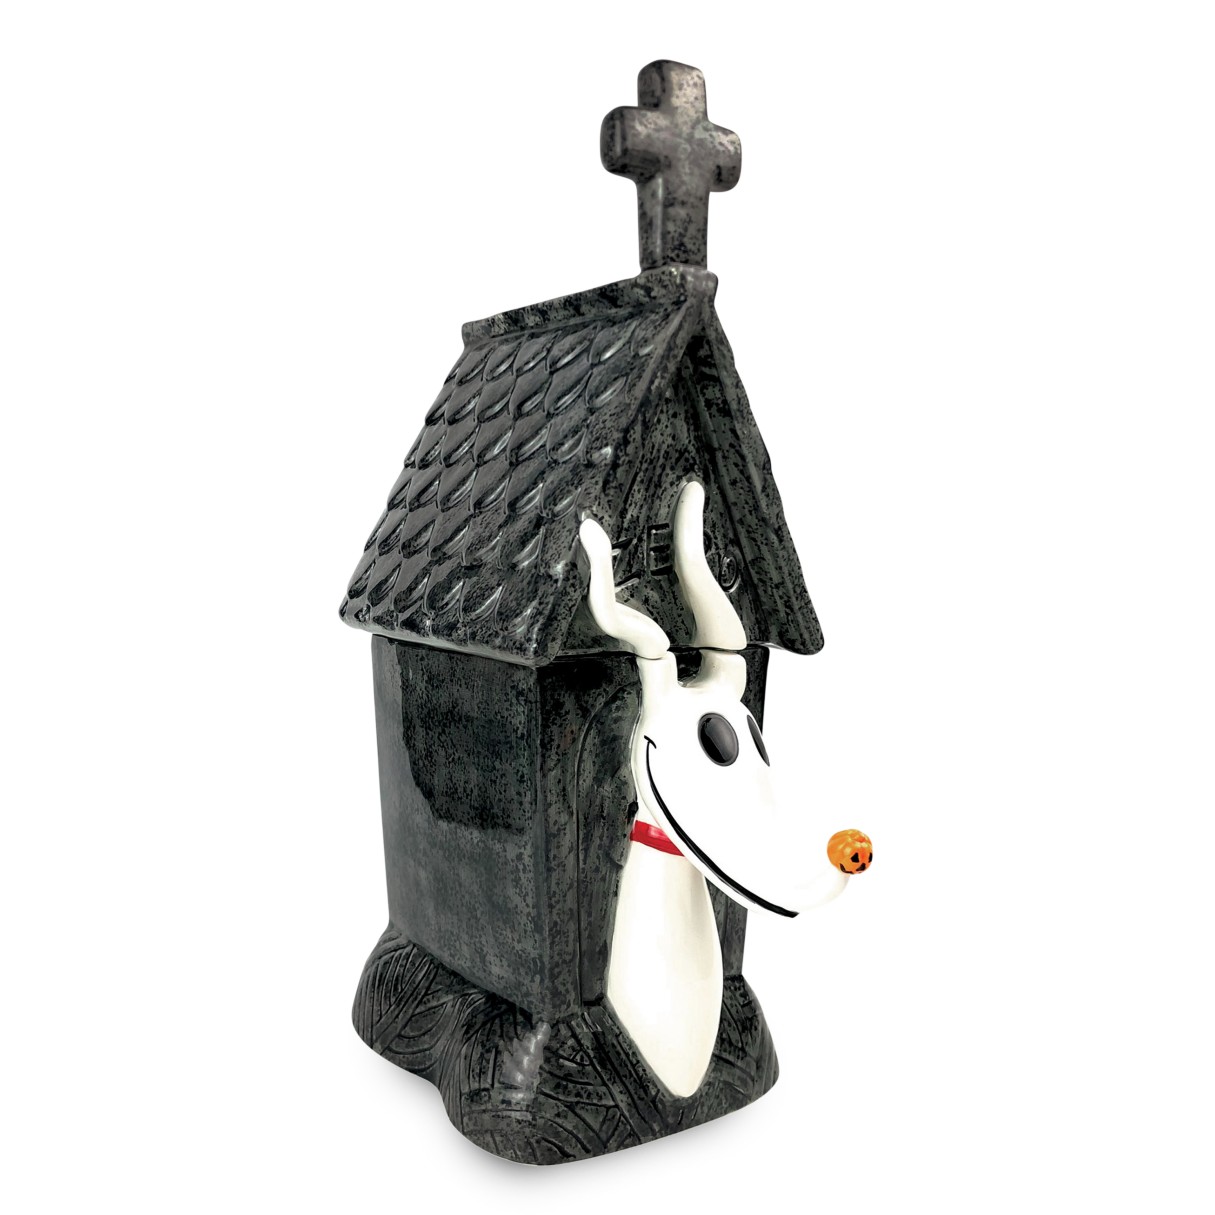 Zero Cookie Jar by Department 56 – The Nightmare Before Christmas